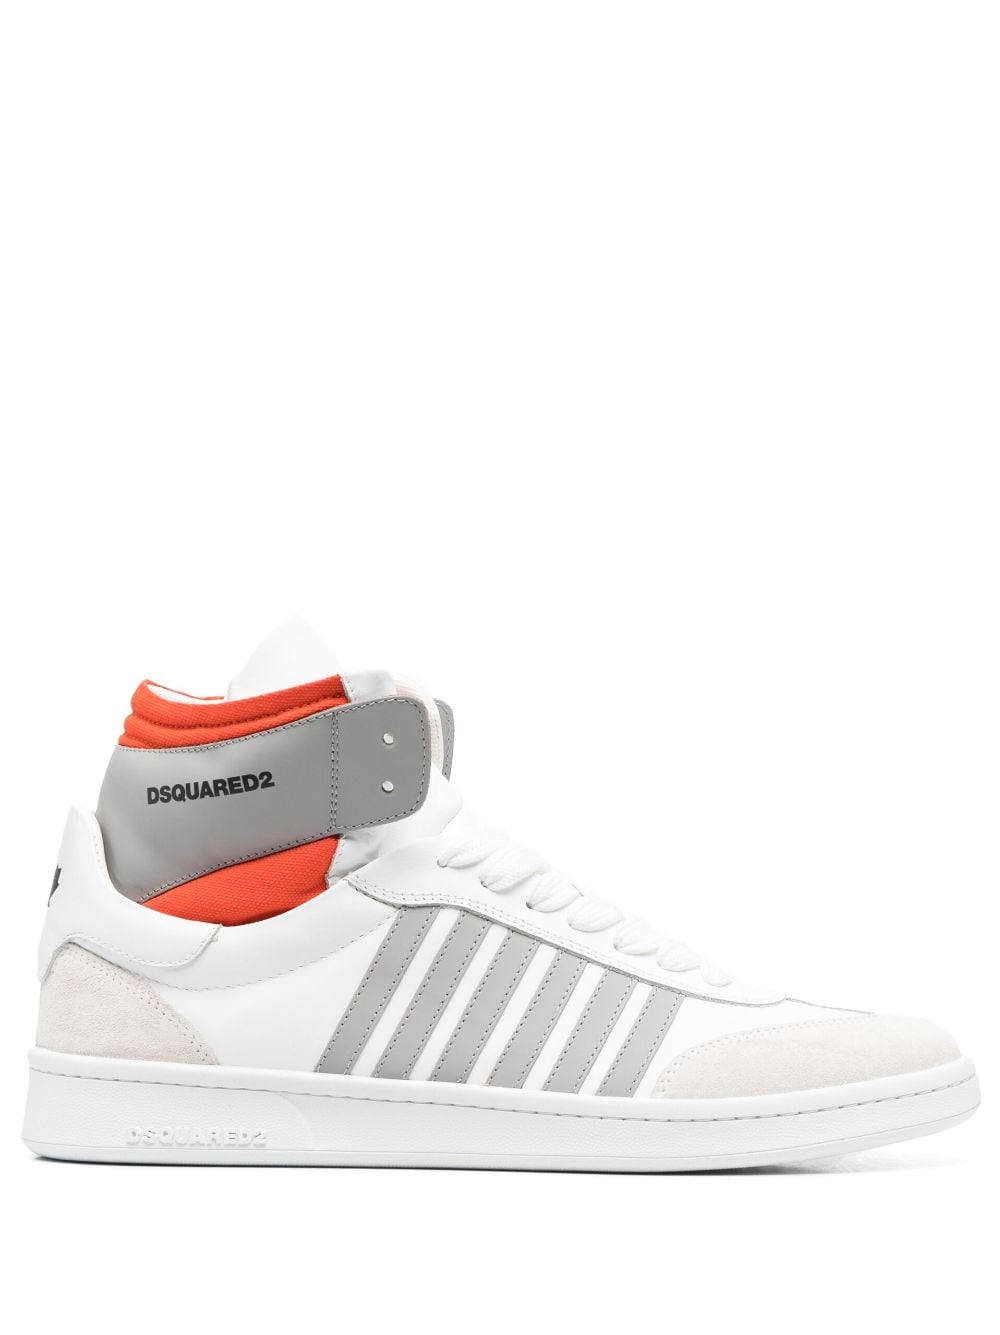 Dsquared2 Canadian high-top sneakers - White von Dsquared2